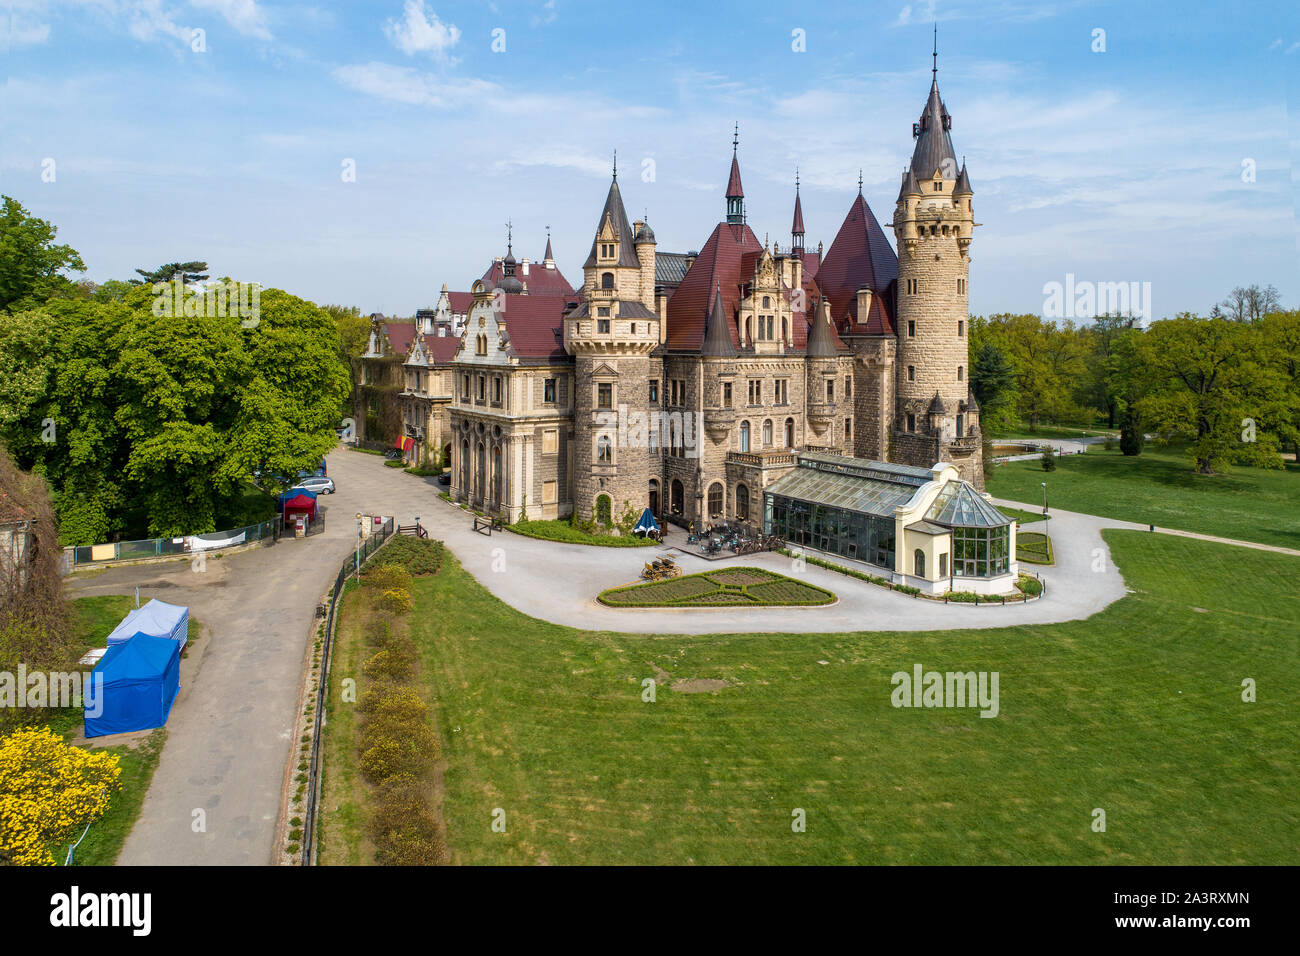 Fabulous historic castle in Moszna near Opole, Silesia, Poland. Built in XVII century, extended from 1900 to 1914 Stock Photo